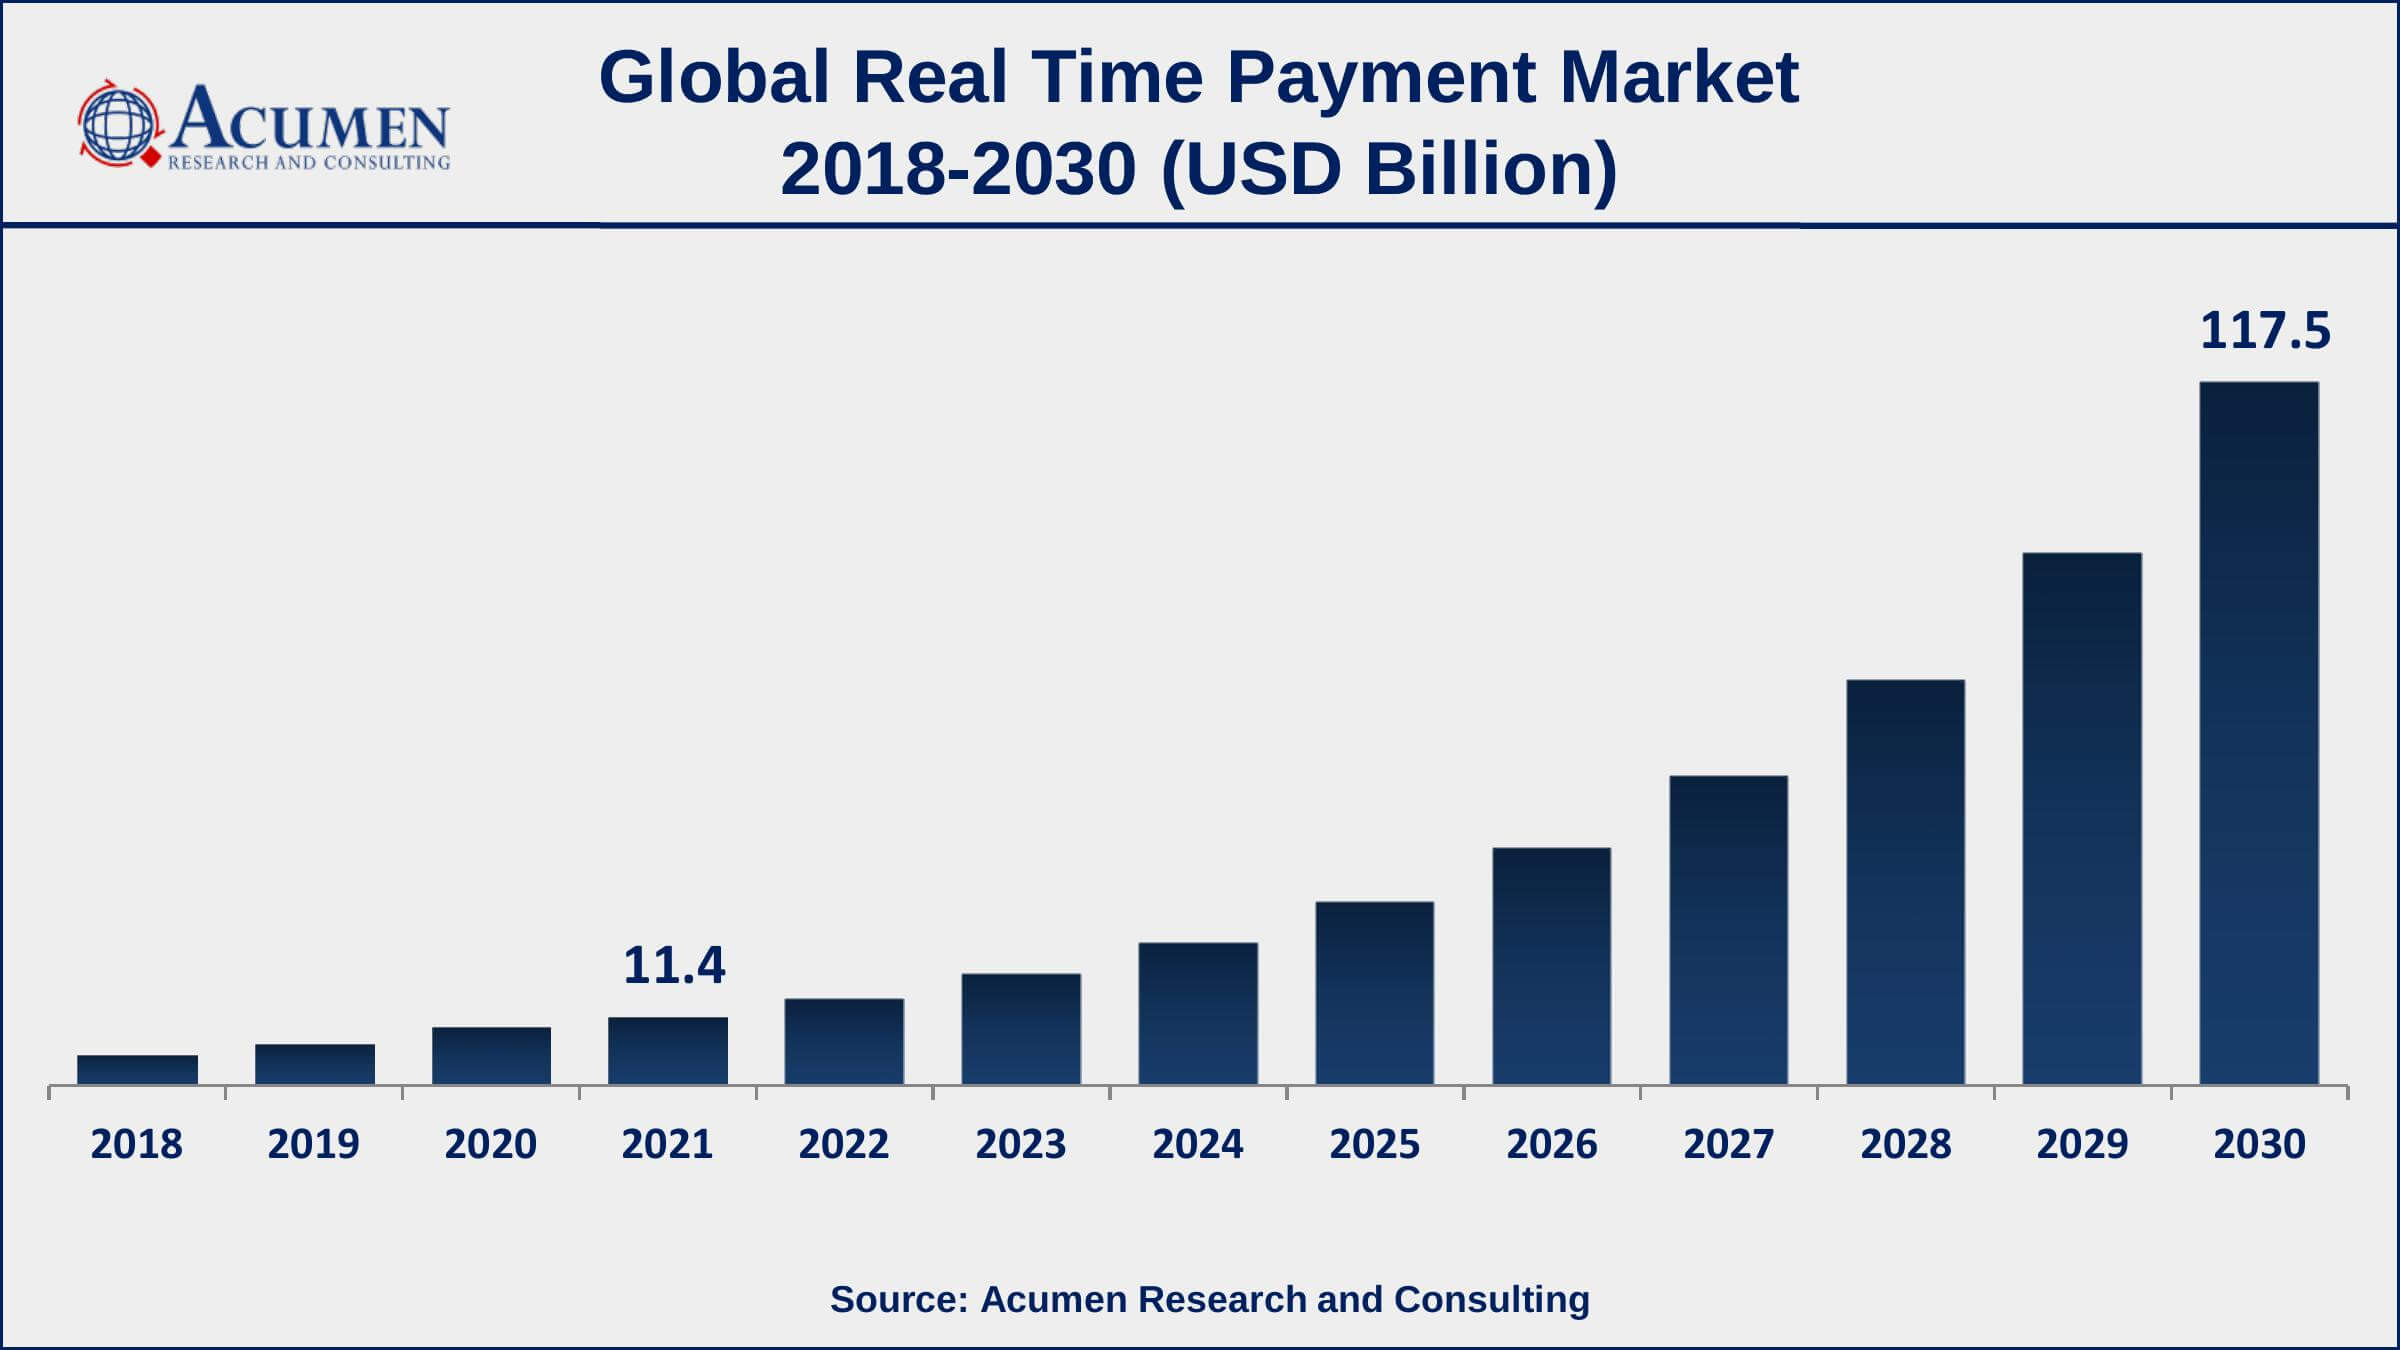 North America real time payment market growth will observe strongest CAGR from 2022 to 2030